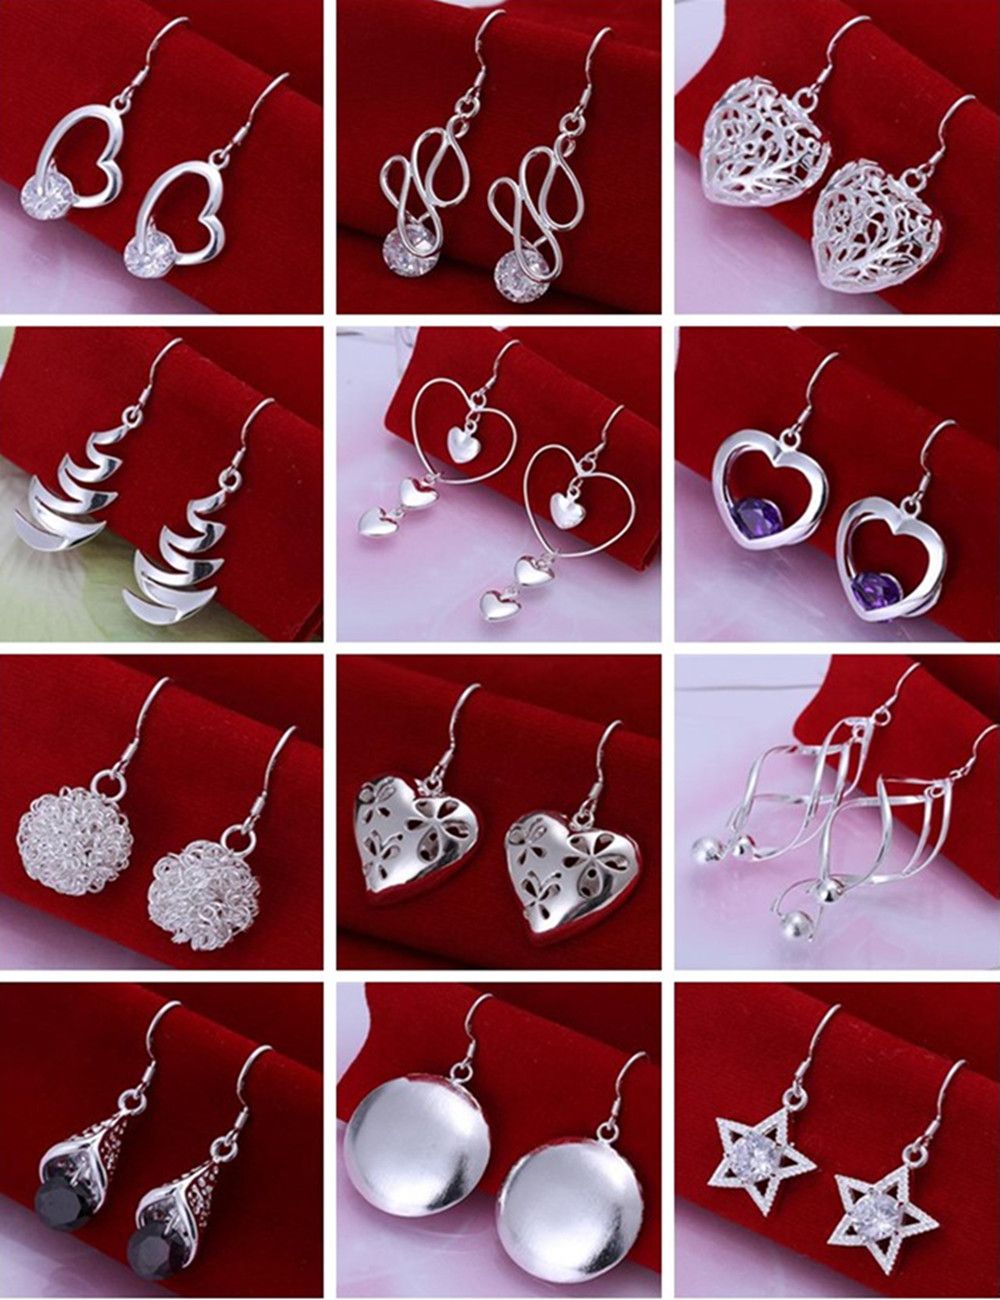 Fashion Cheap Jewelry Mixed 50pair Women/girl earring 925 silver Earring mix order Best gift Free shipping Hot Sale